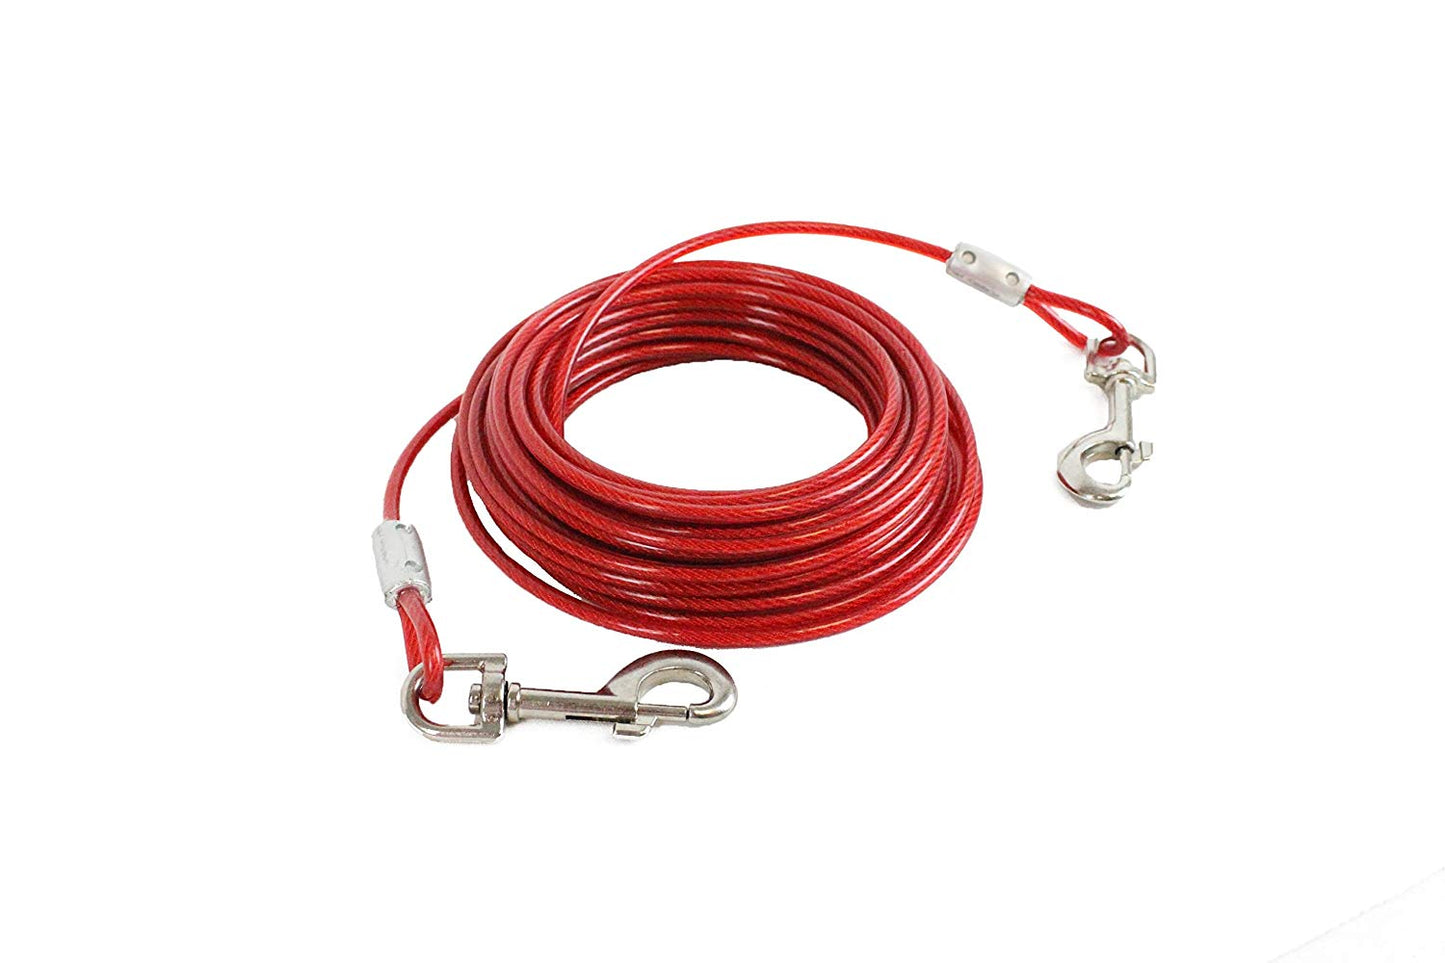 Dog Tie Out with Cable - Multi-Pack Options